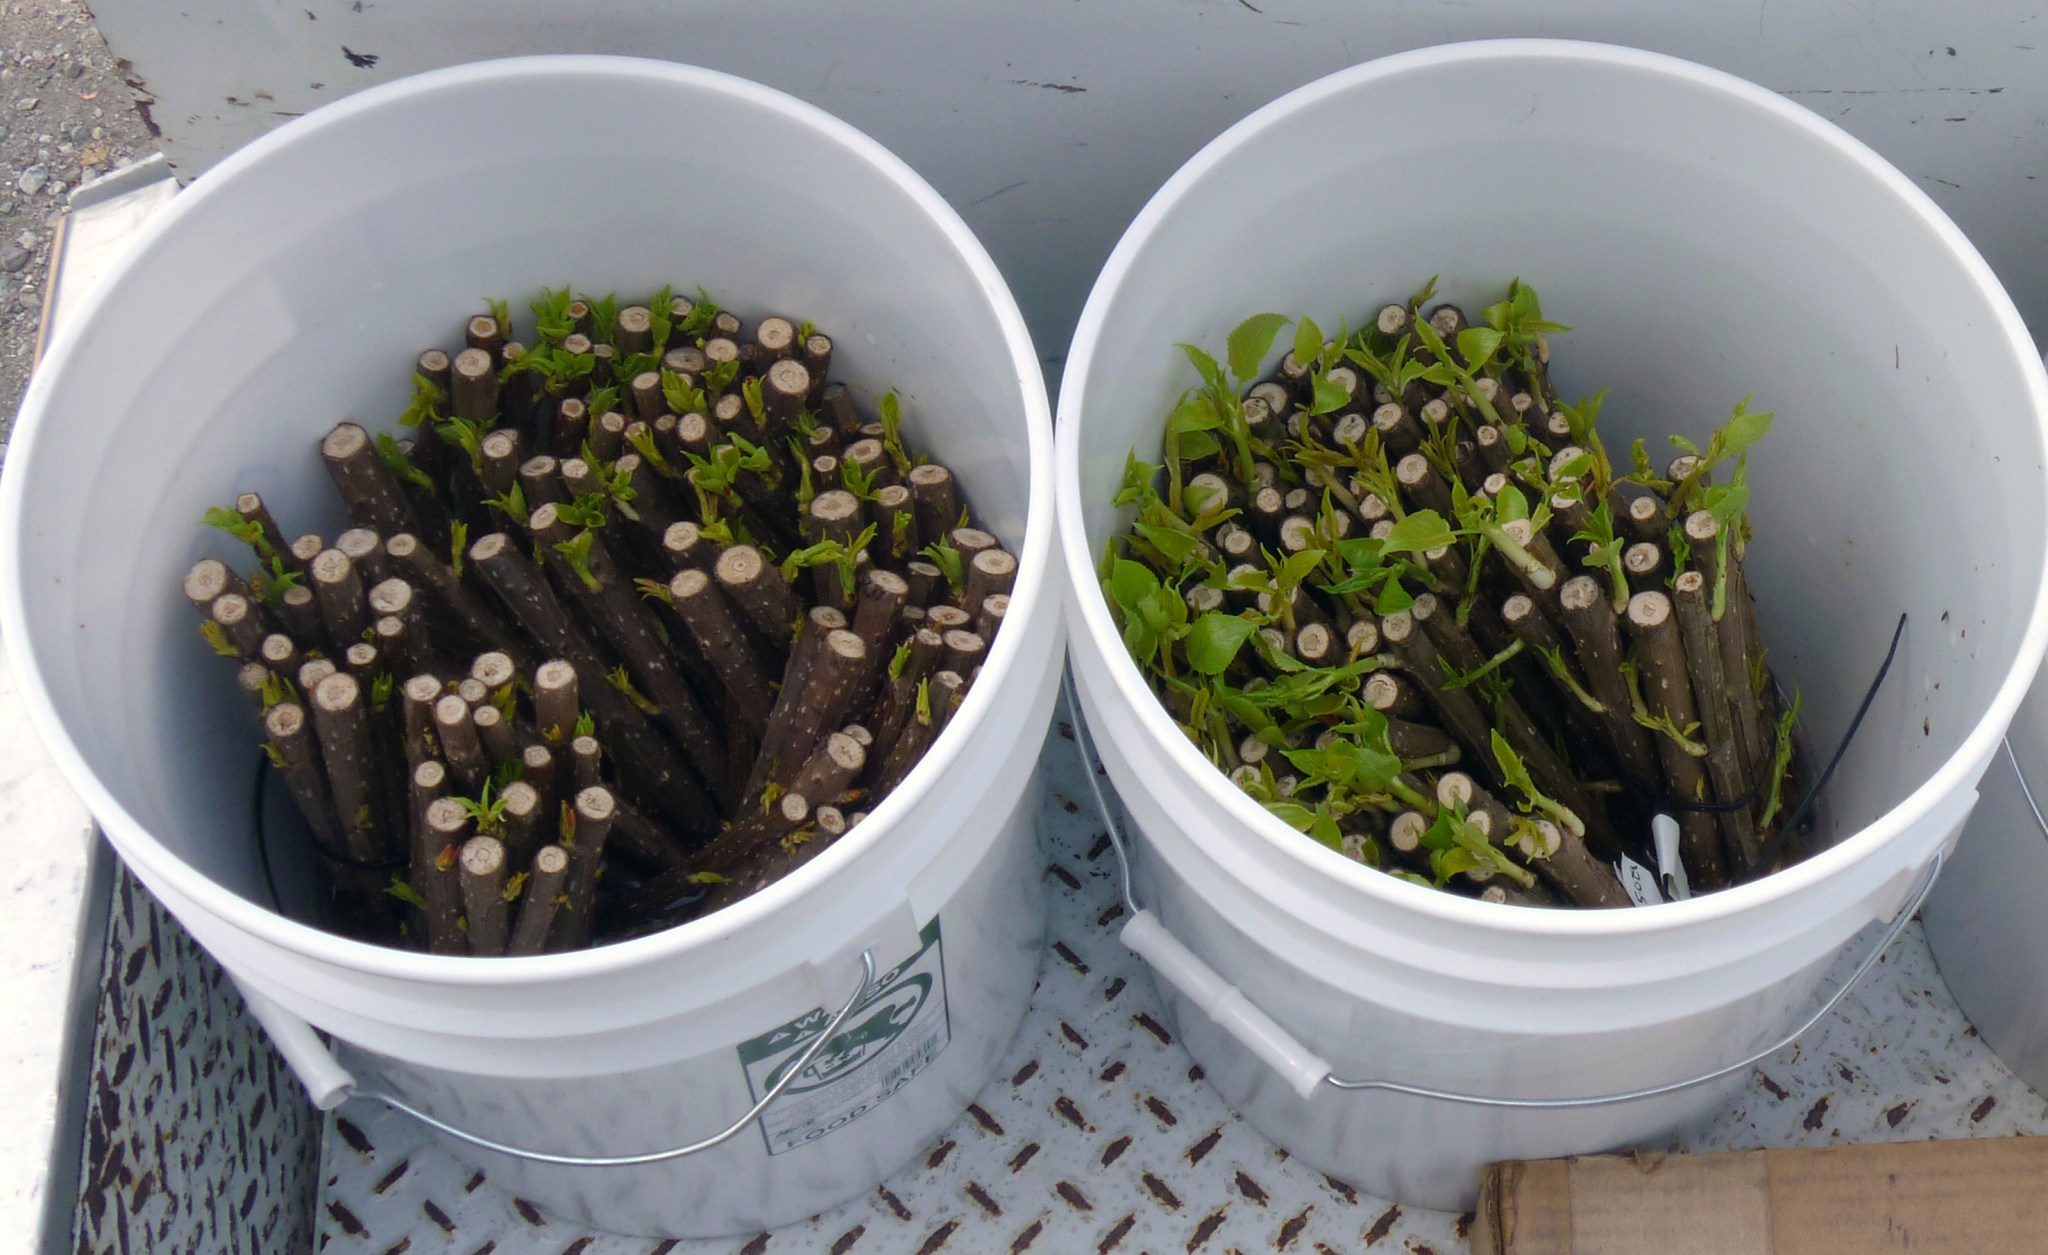 Two buckets filled with poplar cuttings.